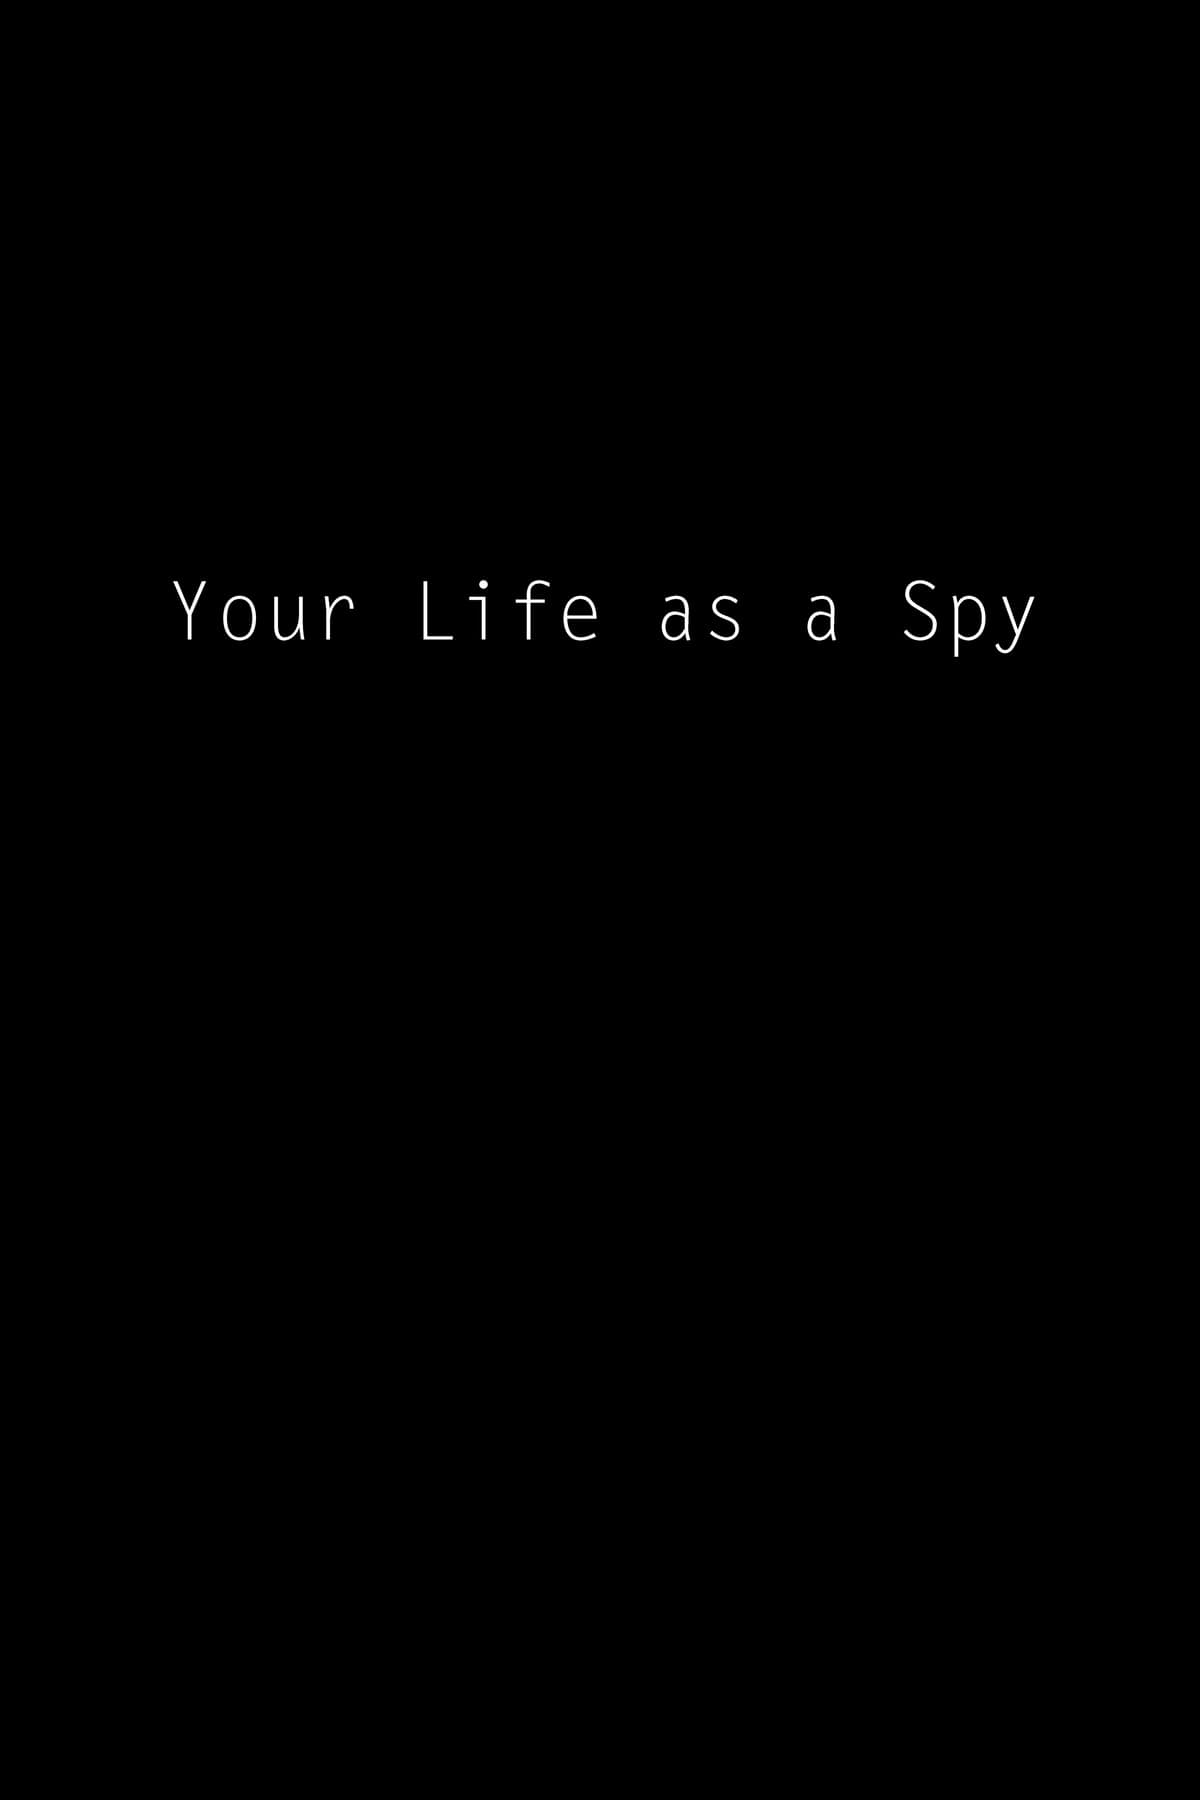 Your Life as a Spy